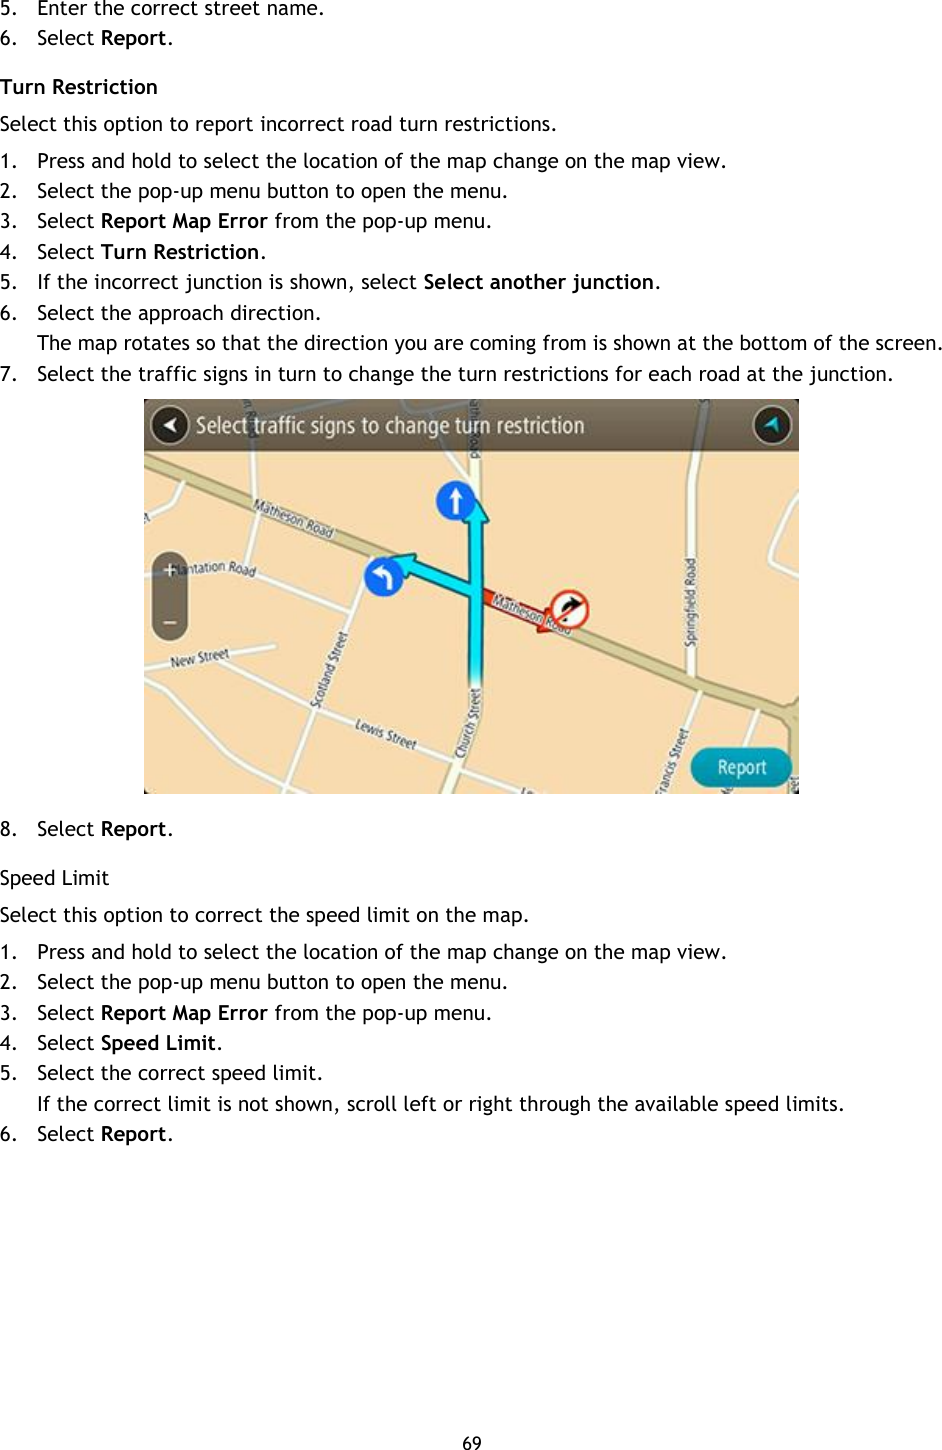 69    5. Enter the correct street name. 6. Select Report. Turn Restriction Select this option to report incorrect road turn restrictions. 1. Press and hold to select the location of the map change on the map view. 2. Select the pop-up menu button to open the menu. 3. Select Report Map Error from the pop-up menu. 4. Select Turn Restriction. 5. If the incorrect junction is shown, select Select another junction.   6. Select the approach direction. The map rotates so that the direction you are coming from is shown at the bottom of the screen. 7. Select the traffic signs in turn to change the turn restrictions for each road at the junction.  8. Select Report. Speed Limit Select this option to correct the speed limit on the map.   1. Press and hold to select the location of the map change on the map view. 2. Select the pop-up menu button to open the menu. 3. Select Report Map Error from the pop-up menu. 4. Select Speed Limit. 5. Select the correct speed limit.   If the correct limit is not shown, scroll left or right through the available speed limits.   6. Select Report. 